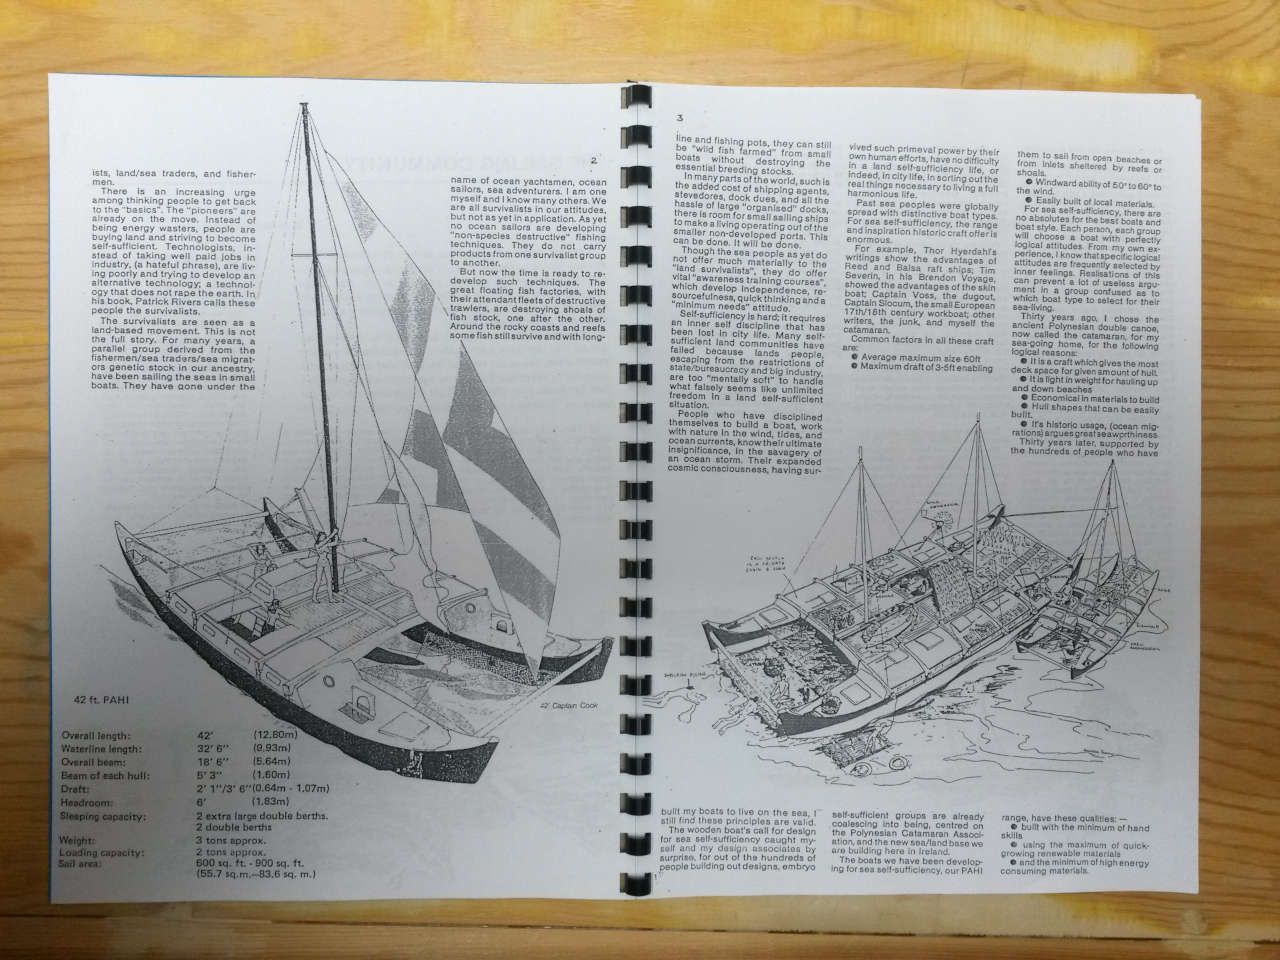 A booklet on a wooden surface